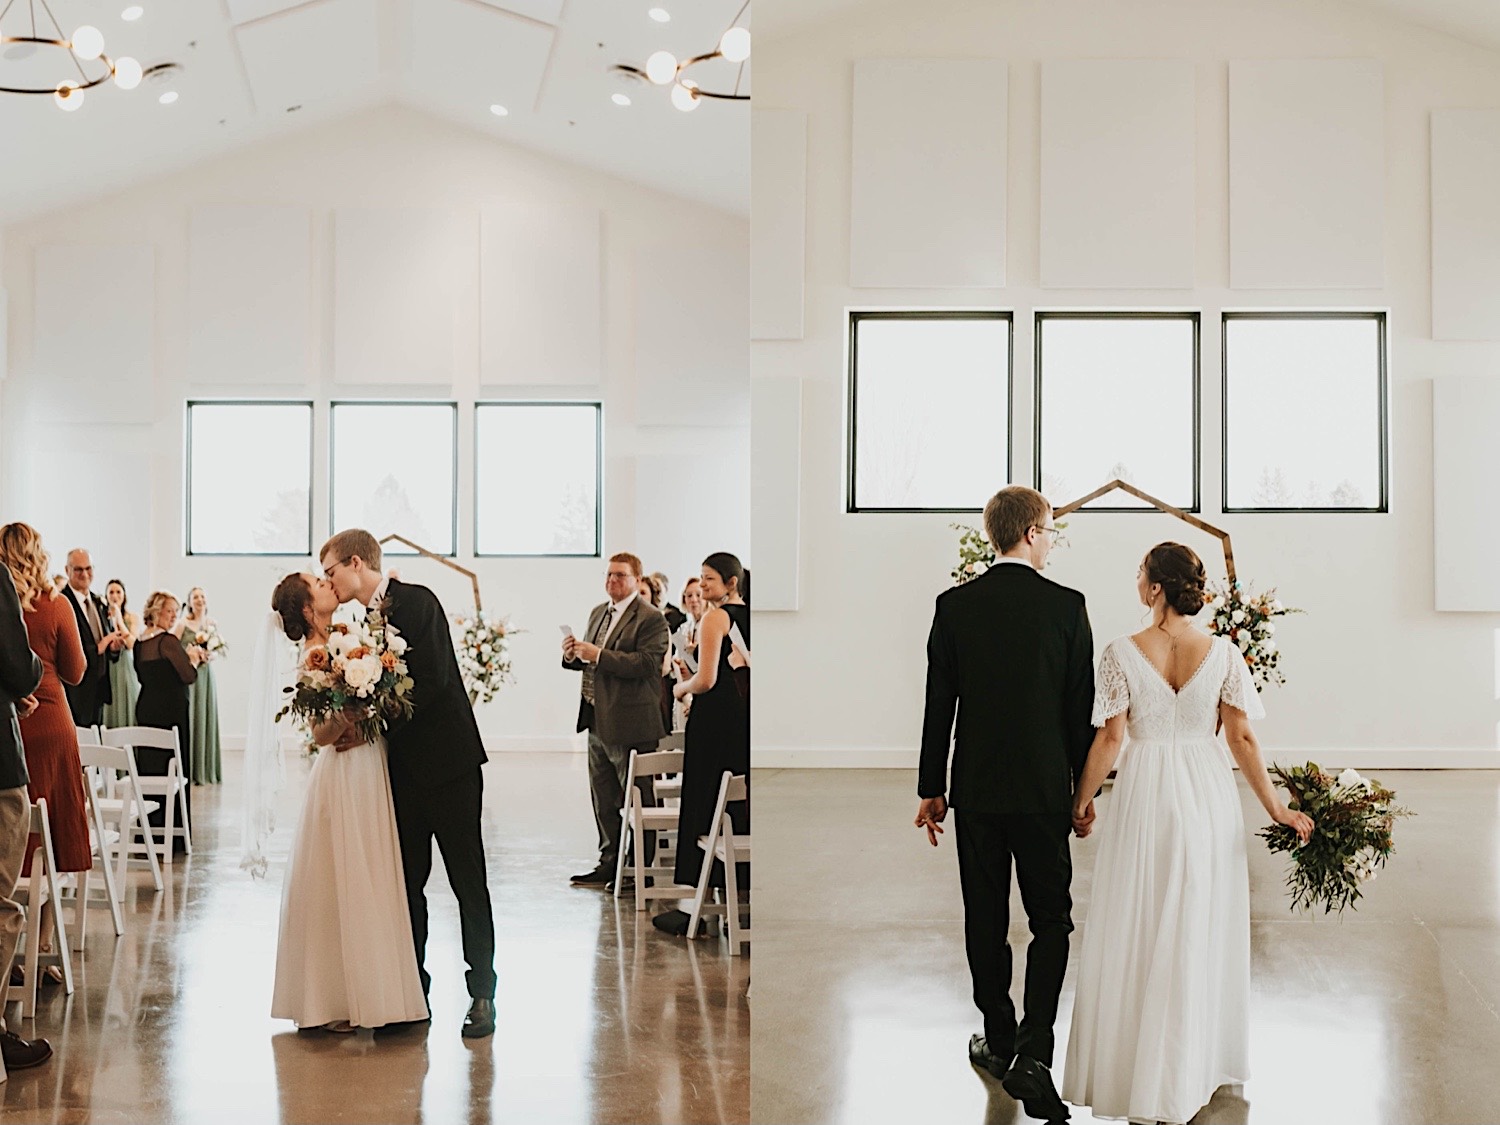 2 photos side by side, the left is of a bride and groom kissing while walking down the aisle together, the right is of the bride and groom walking down the aisle away from the camera